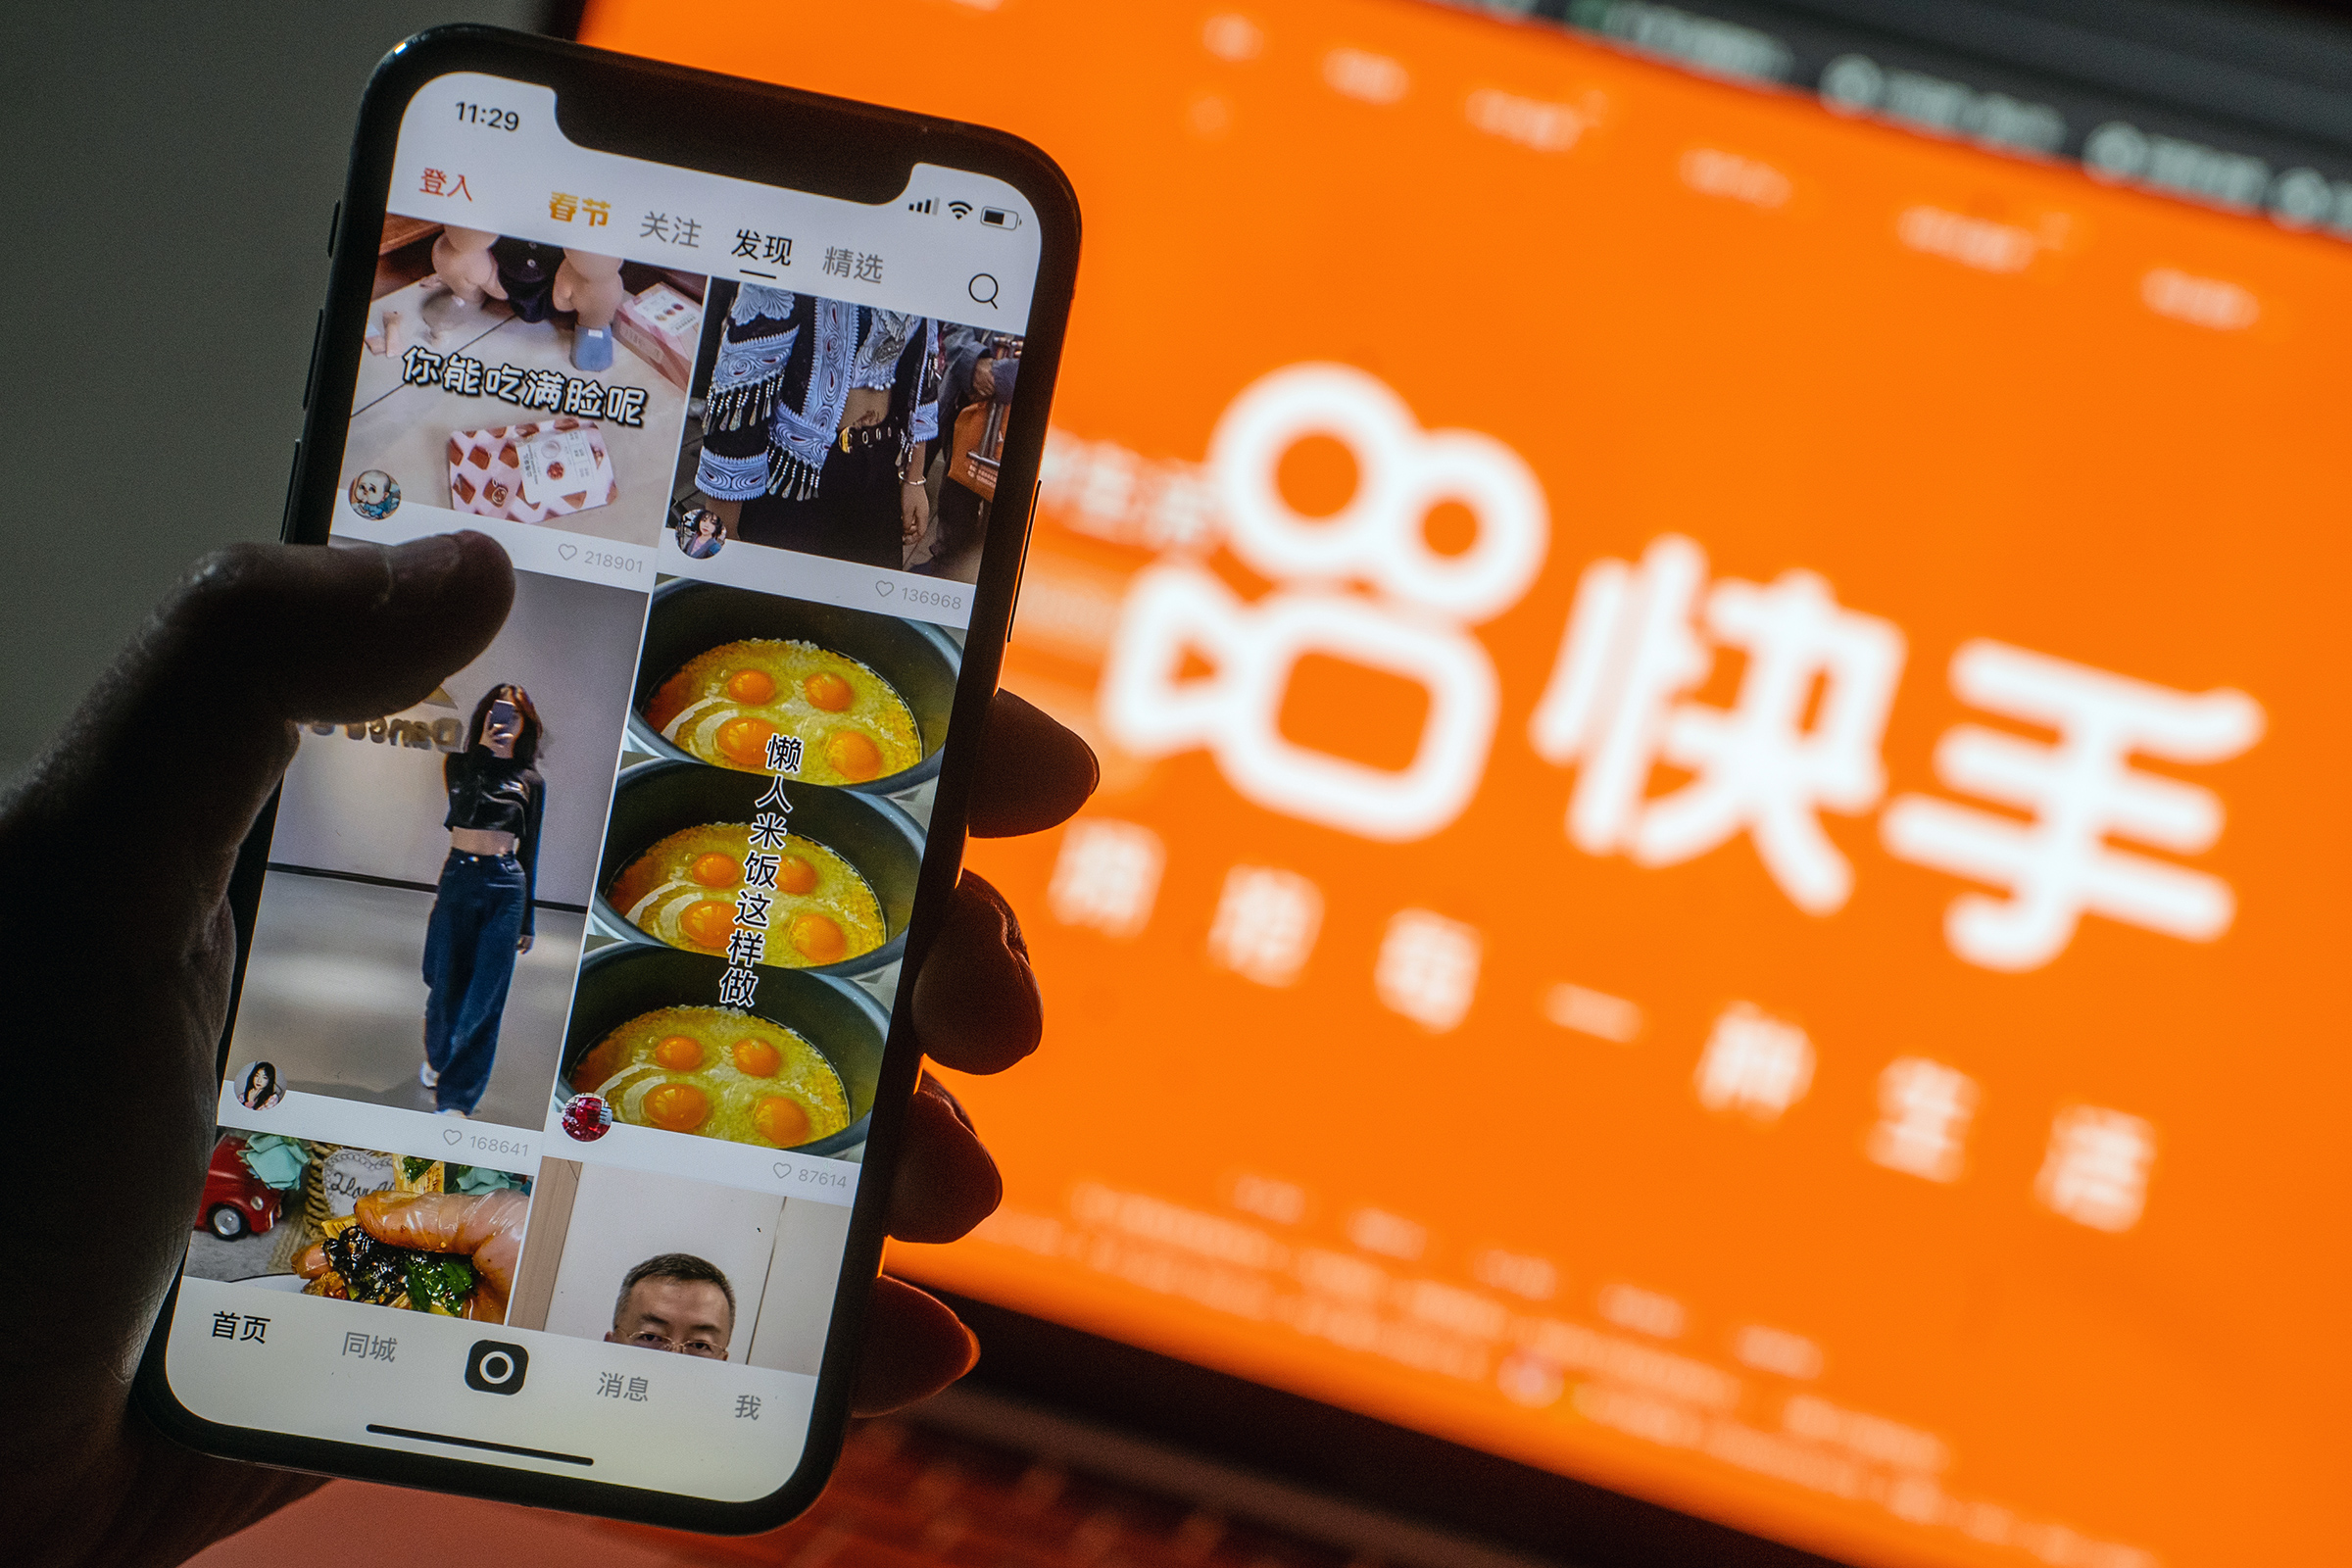 Kuaishou Short-Video App As Company Is Said to Trade at Twice IPO Price in Gray Market